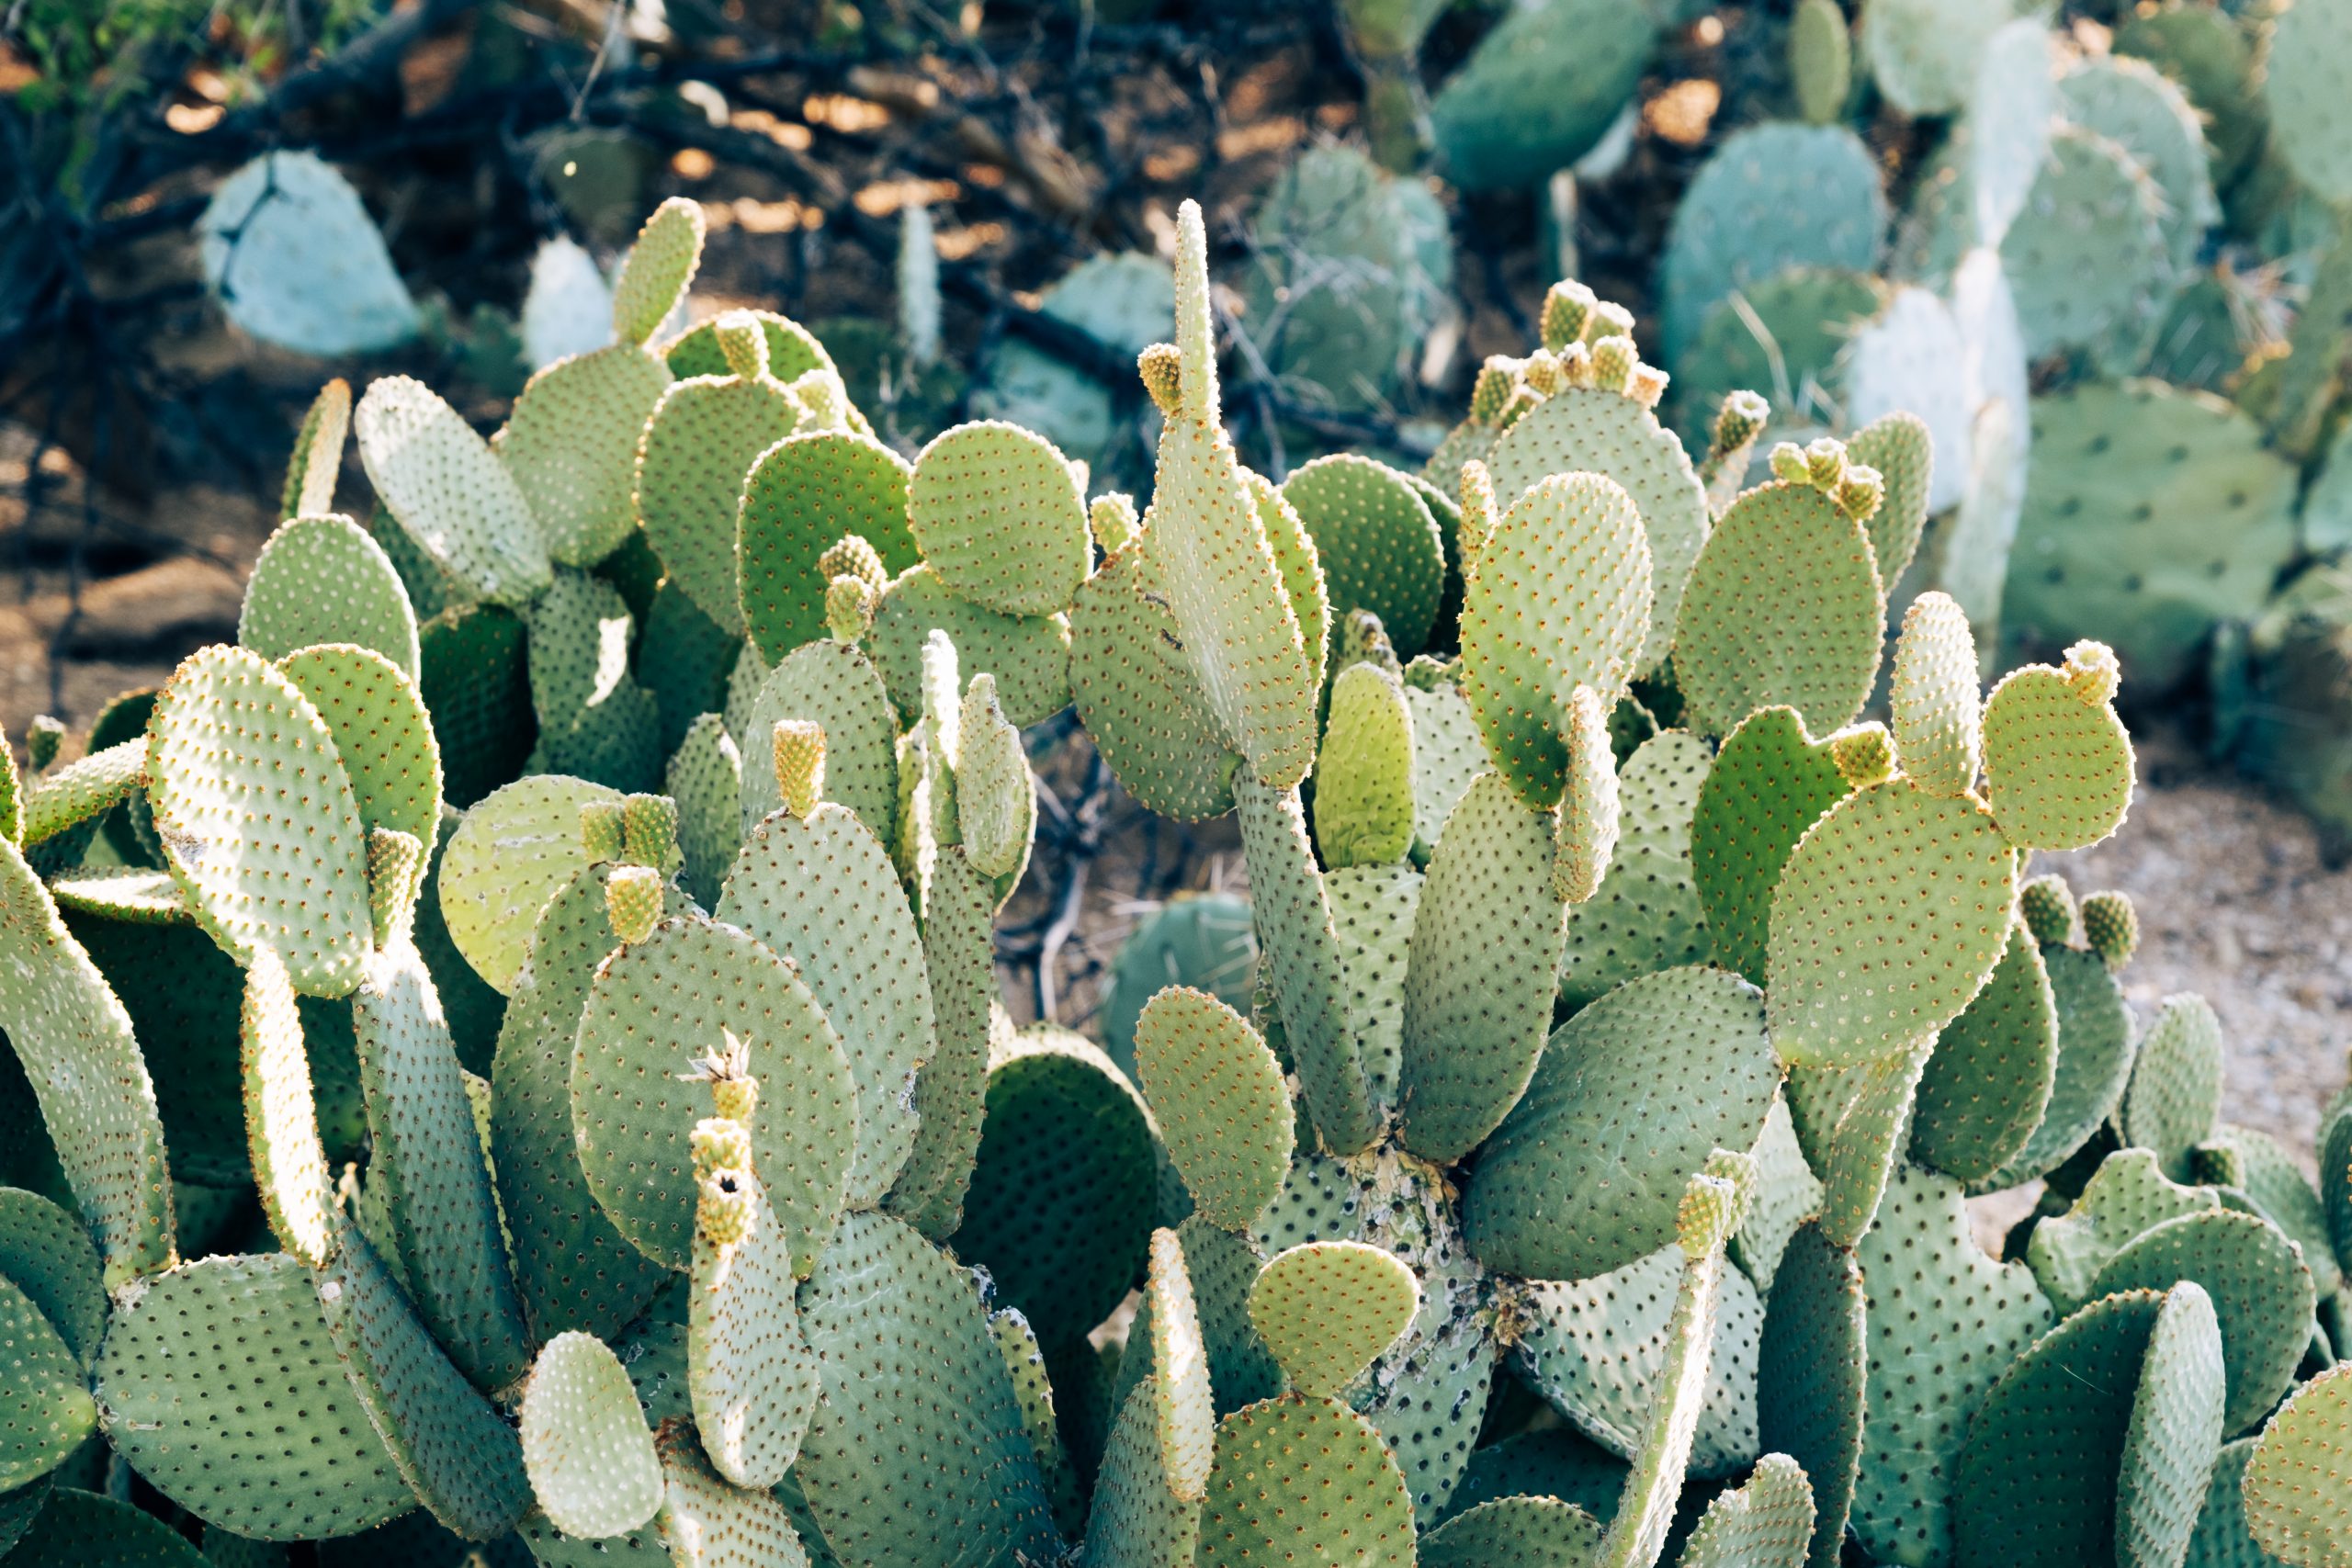 Photograph of bunny rabbit ear cacti, looking over them.